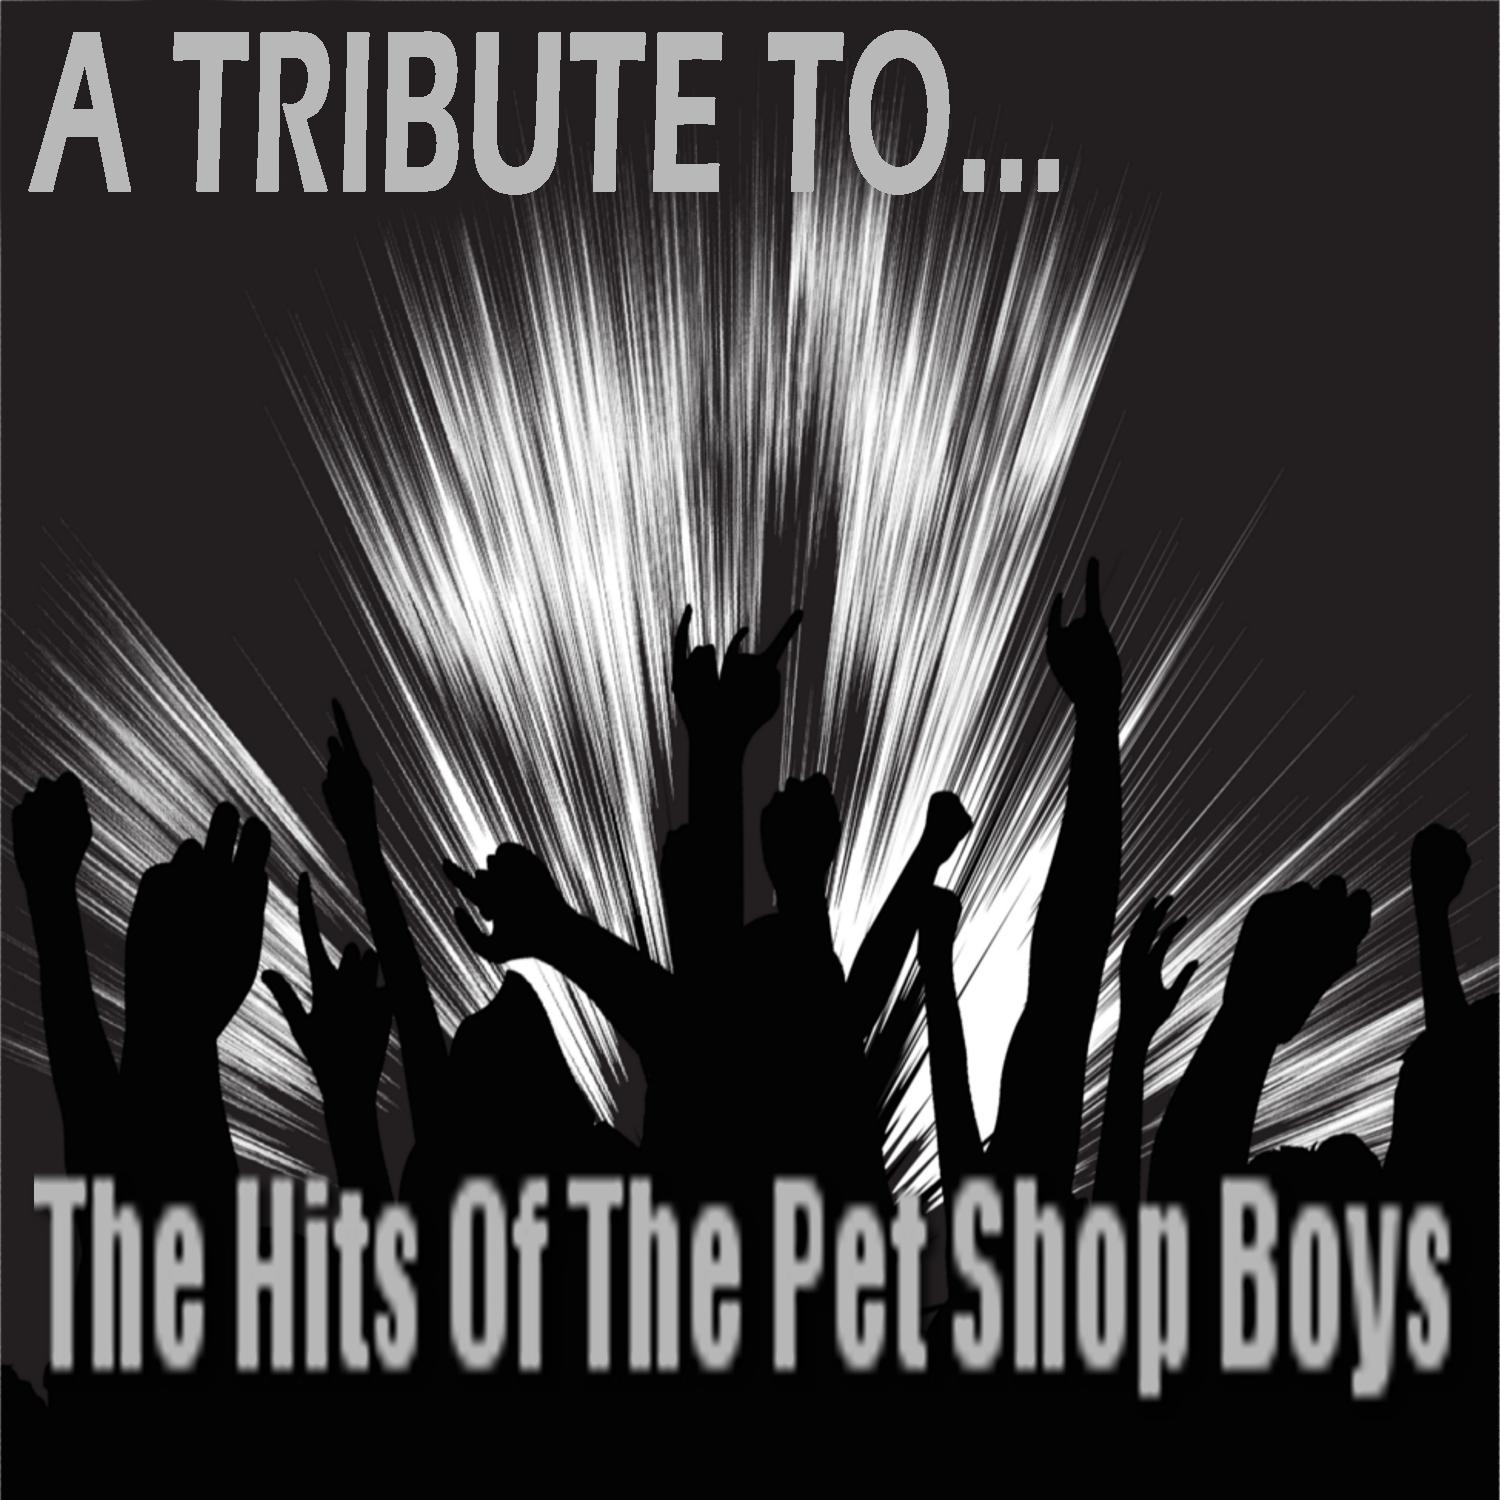 A Tribute To The Hits Of The Pet Shop Boys